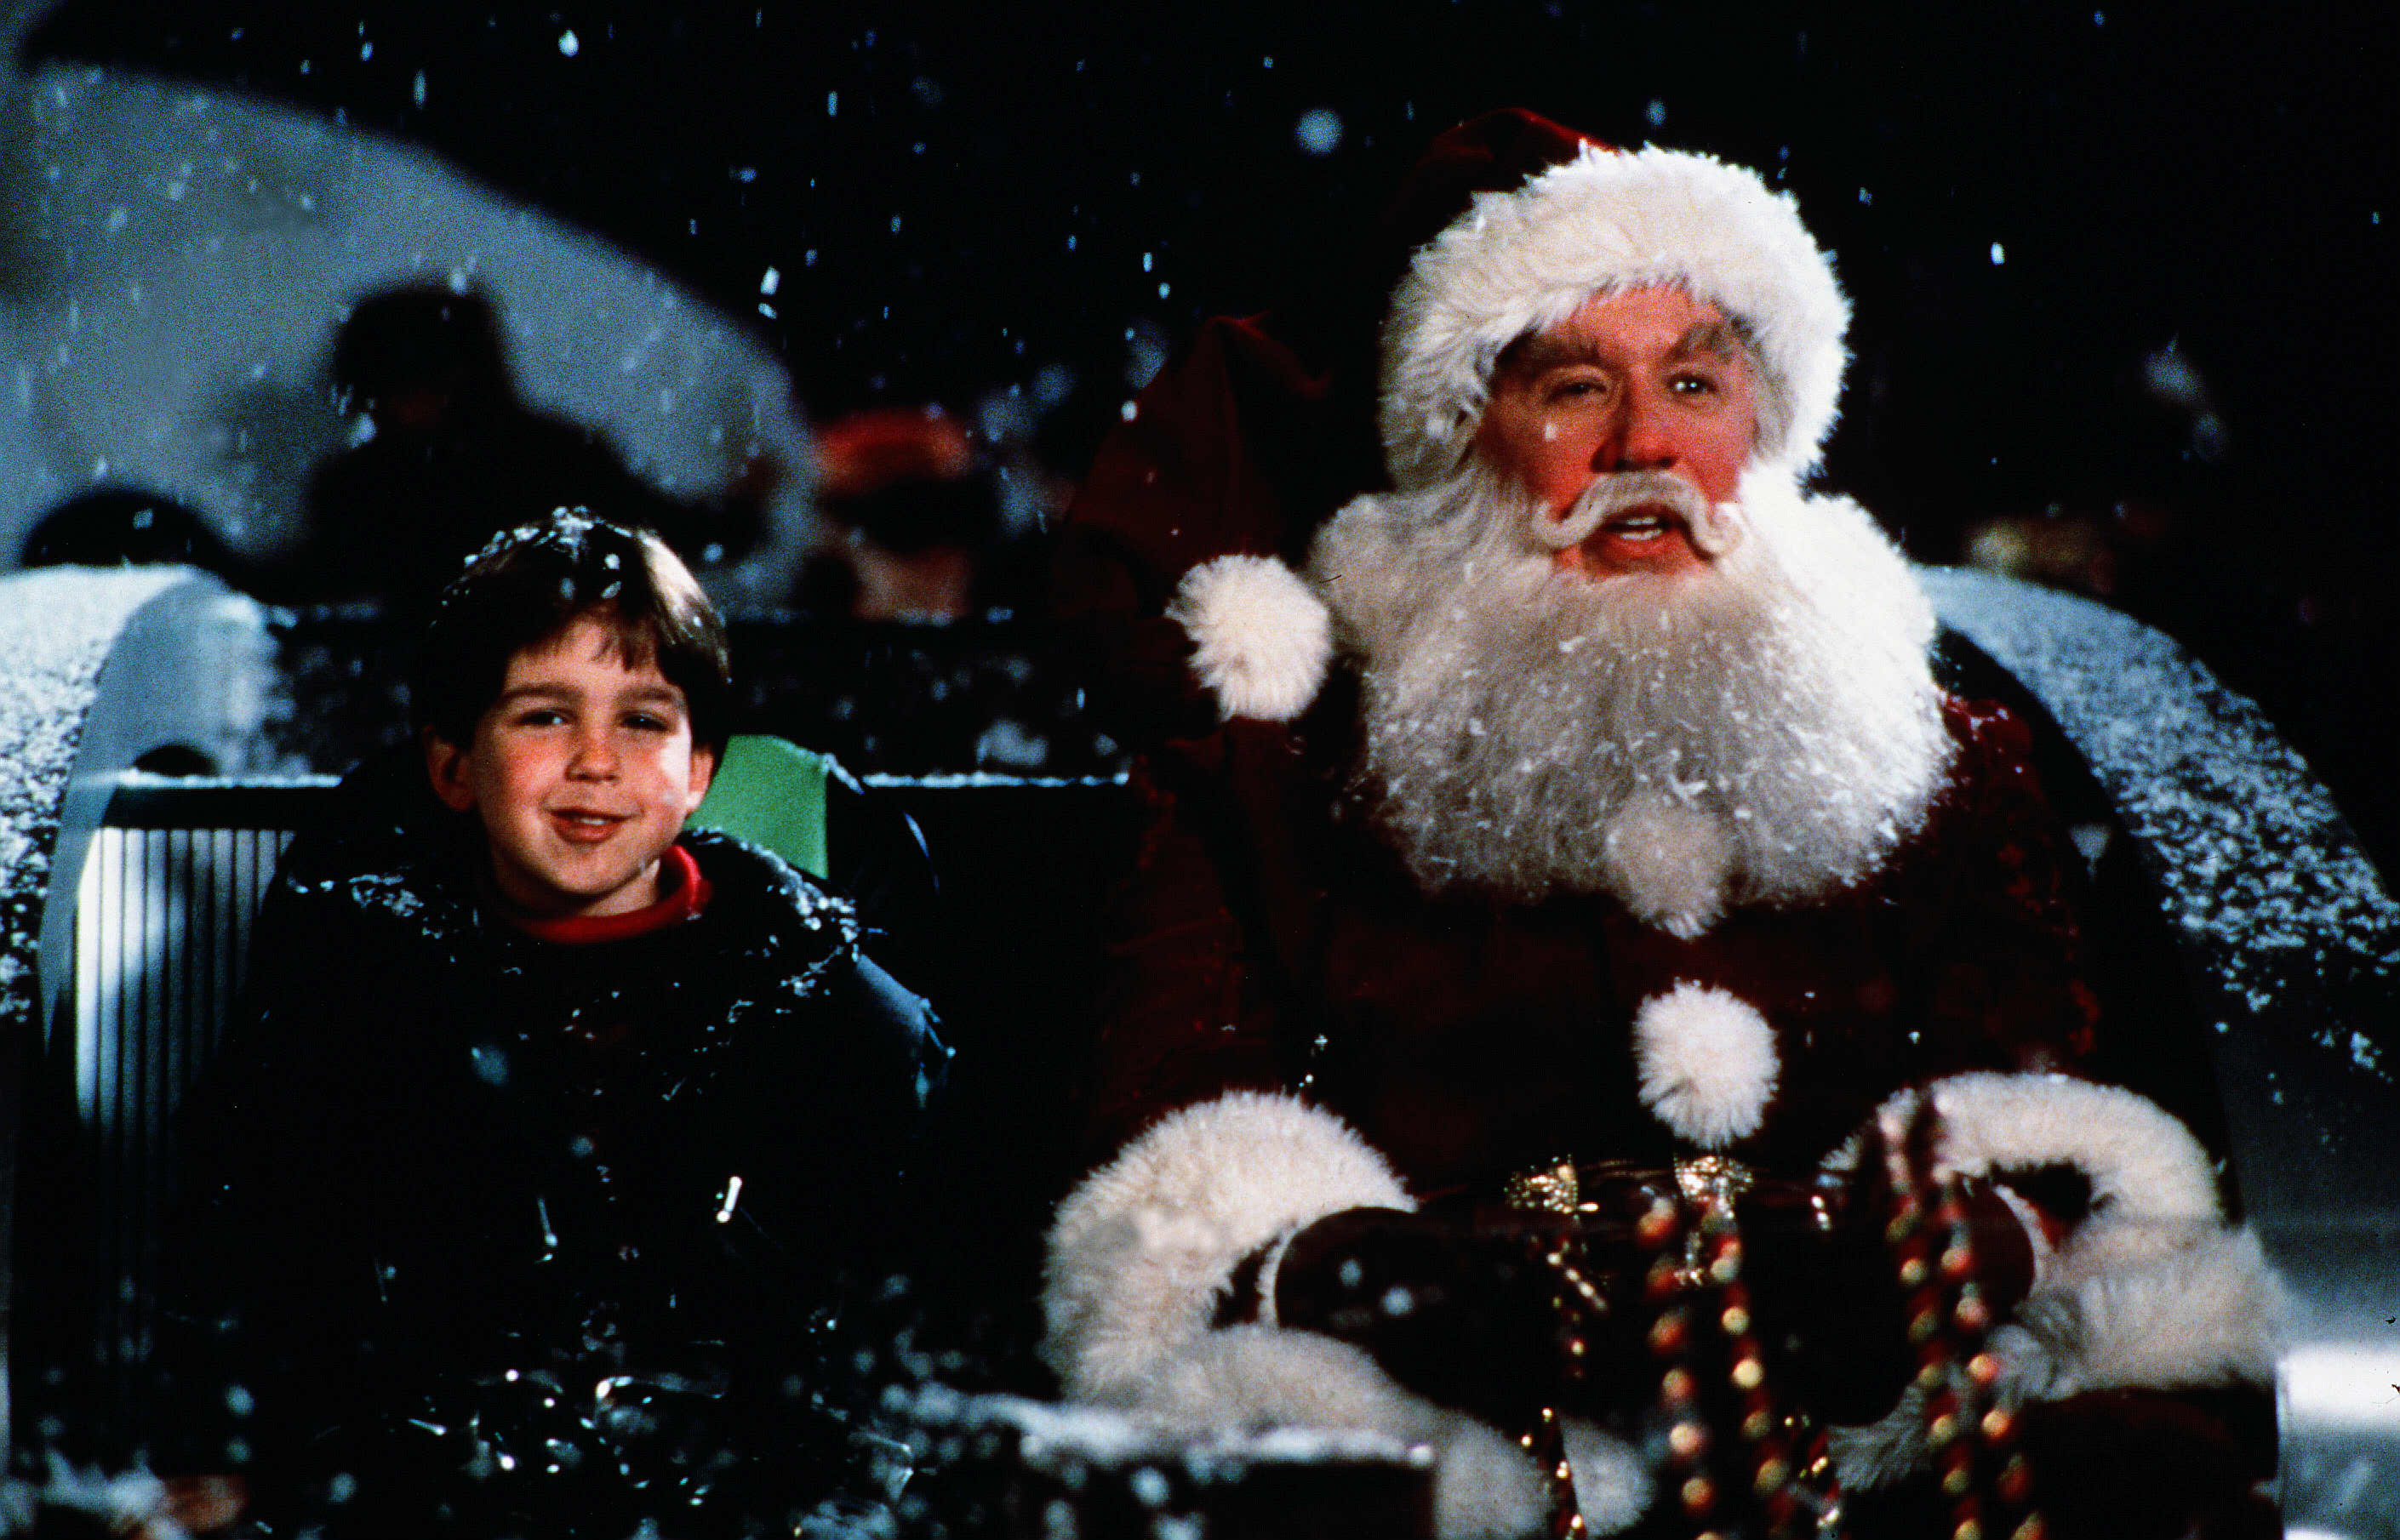 'The Santa Clause' Cast What Are the Stars Doing Now?